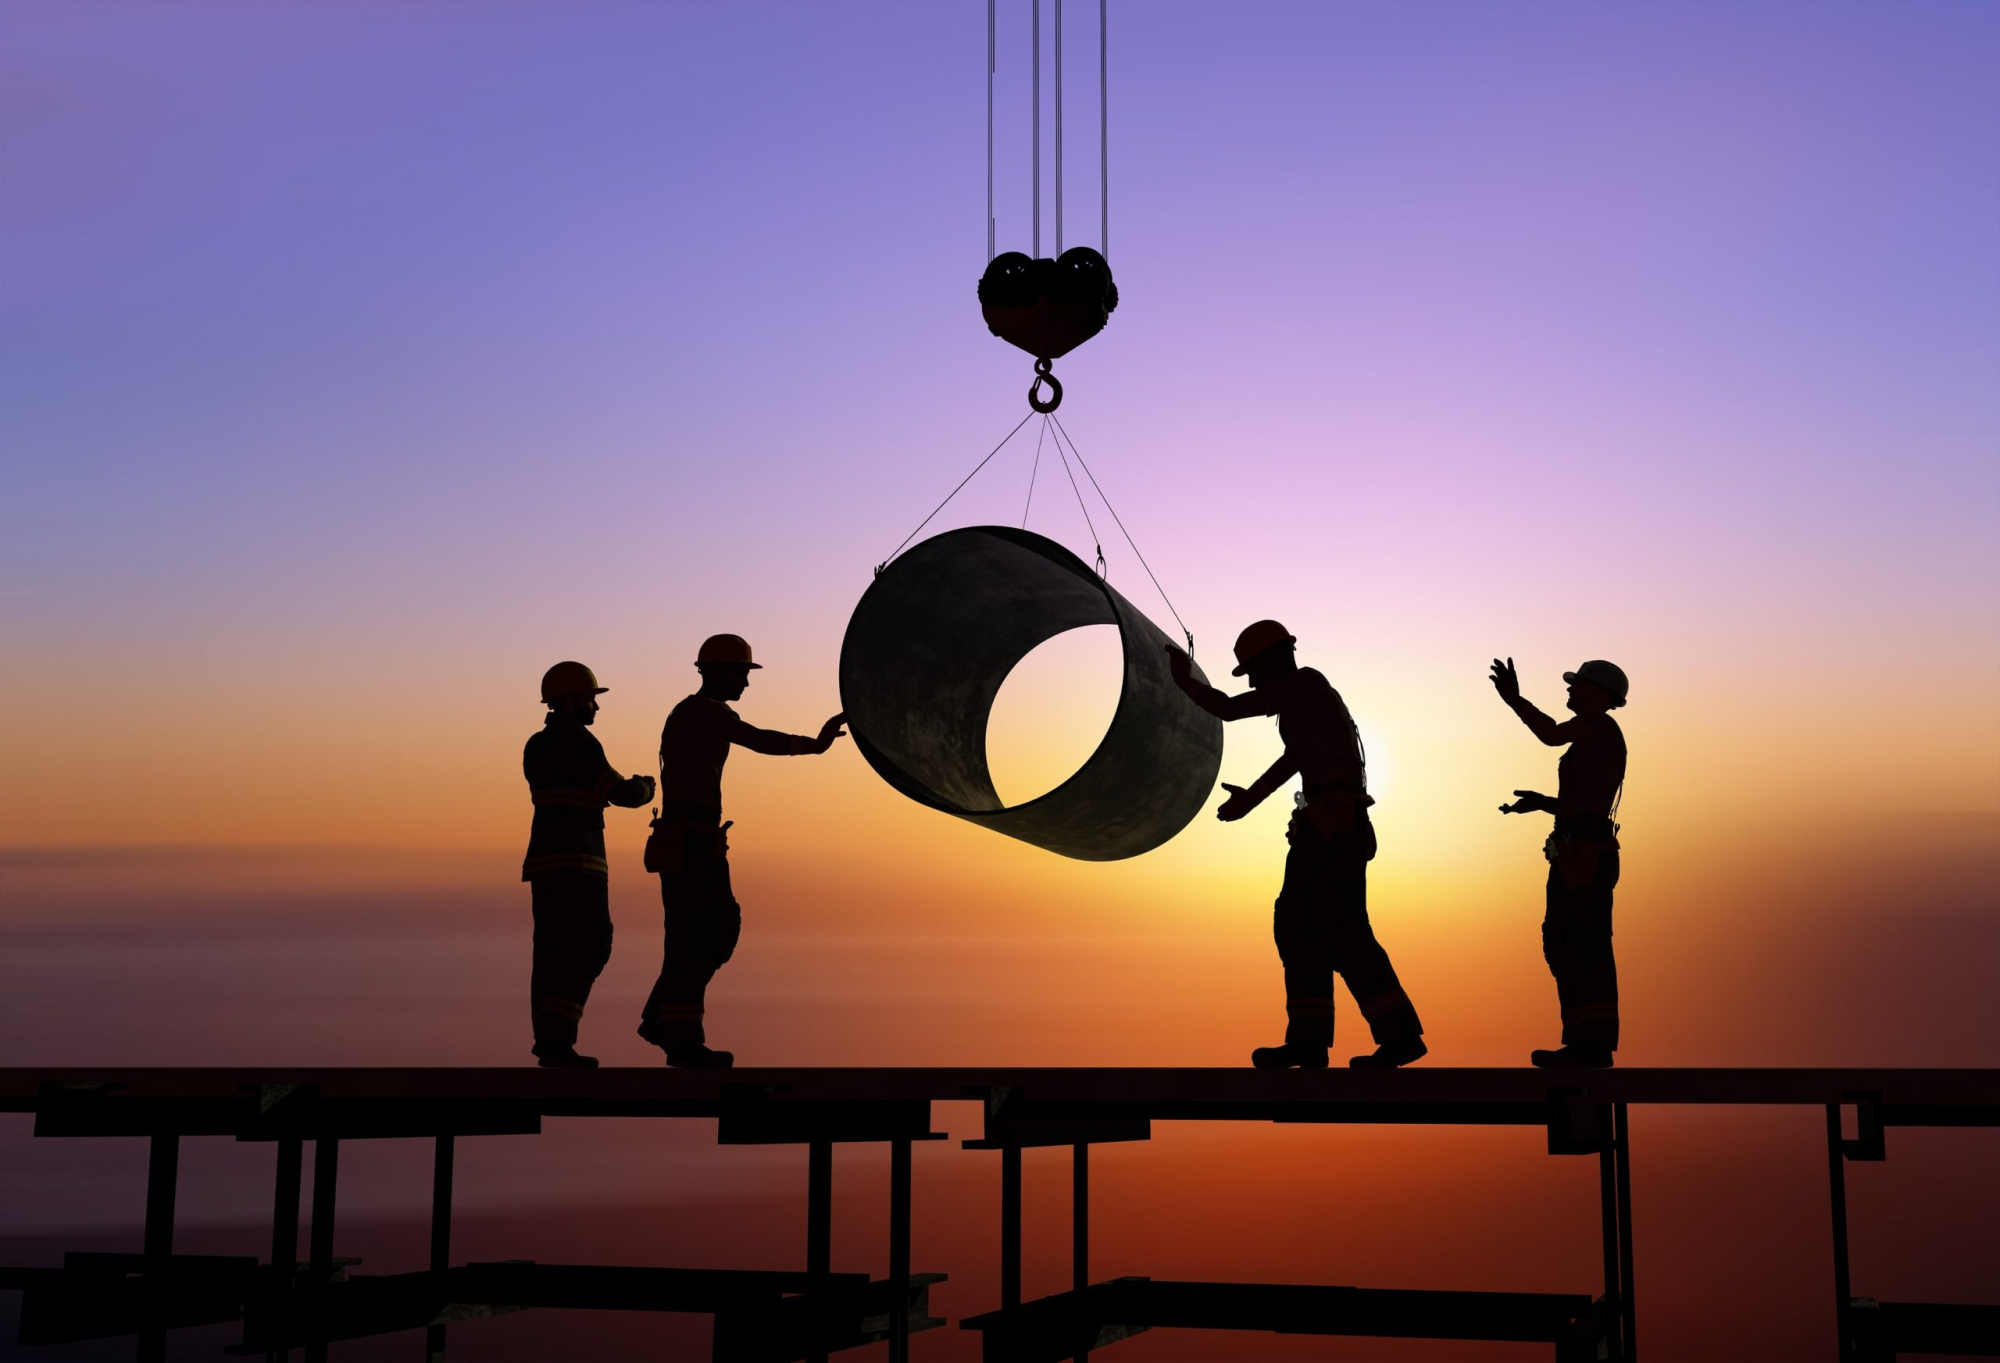 Outline of workers on a construction site with the sun setting in the background.